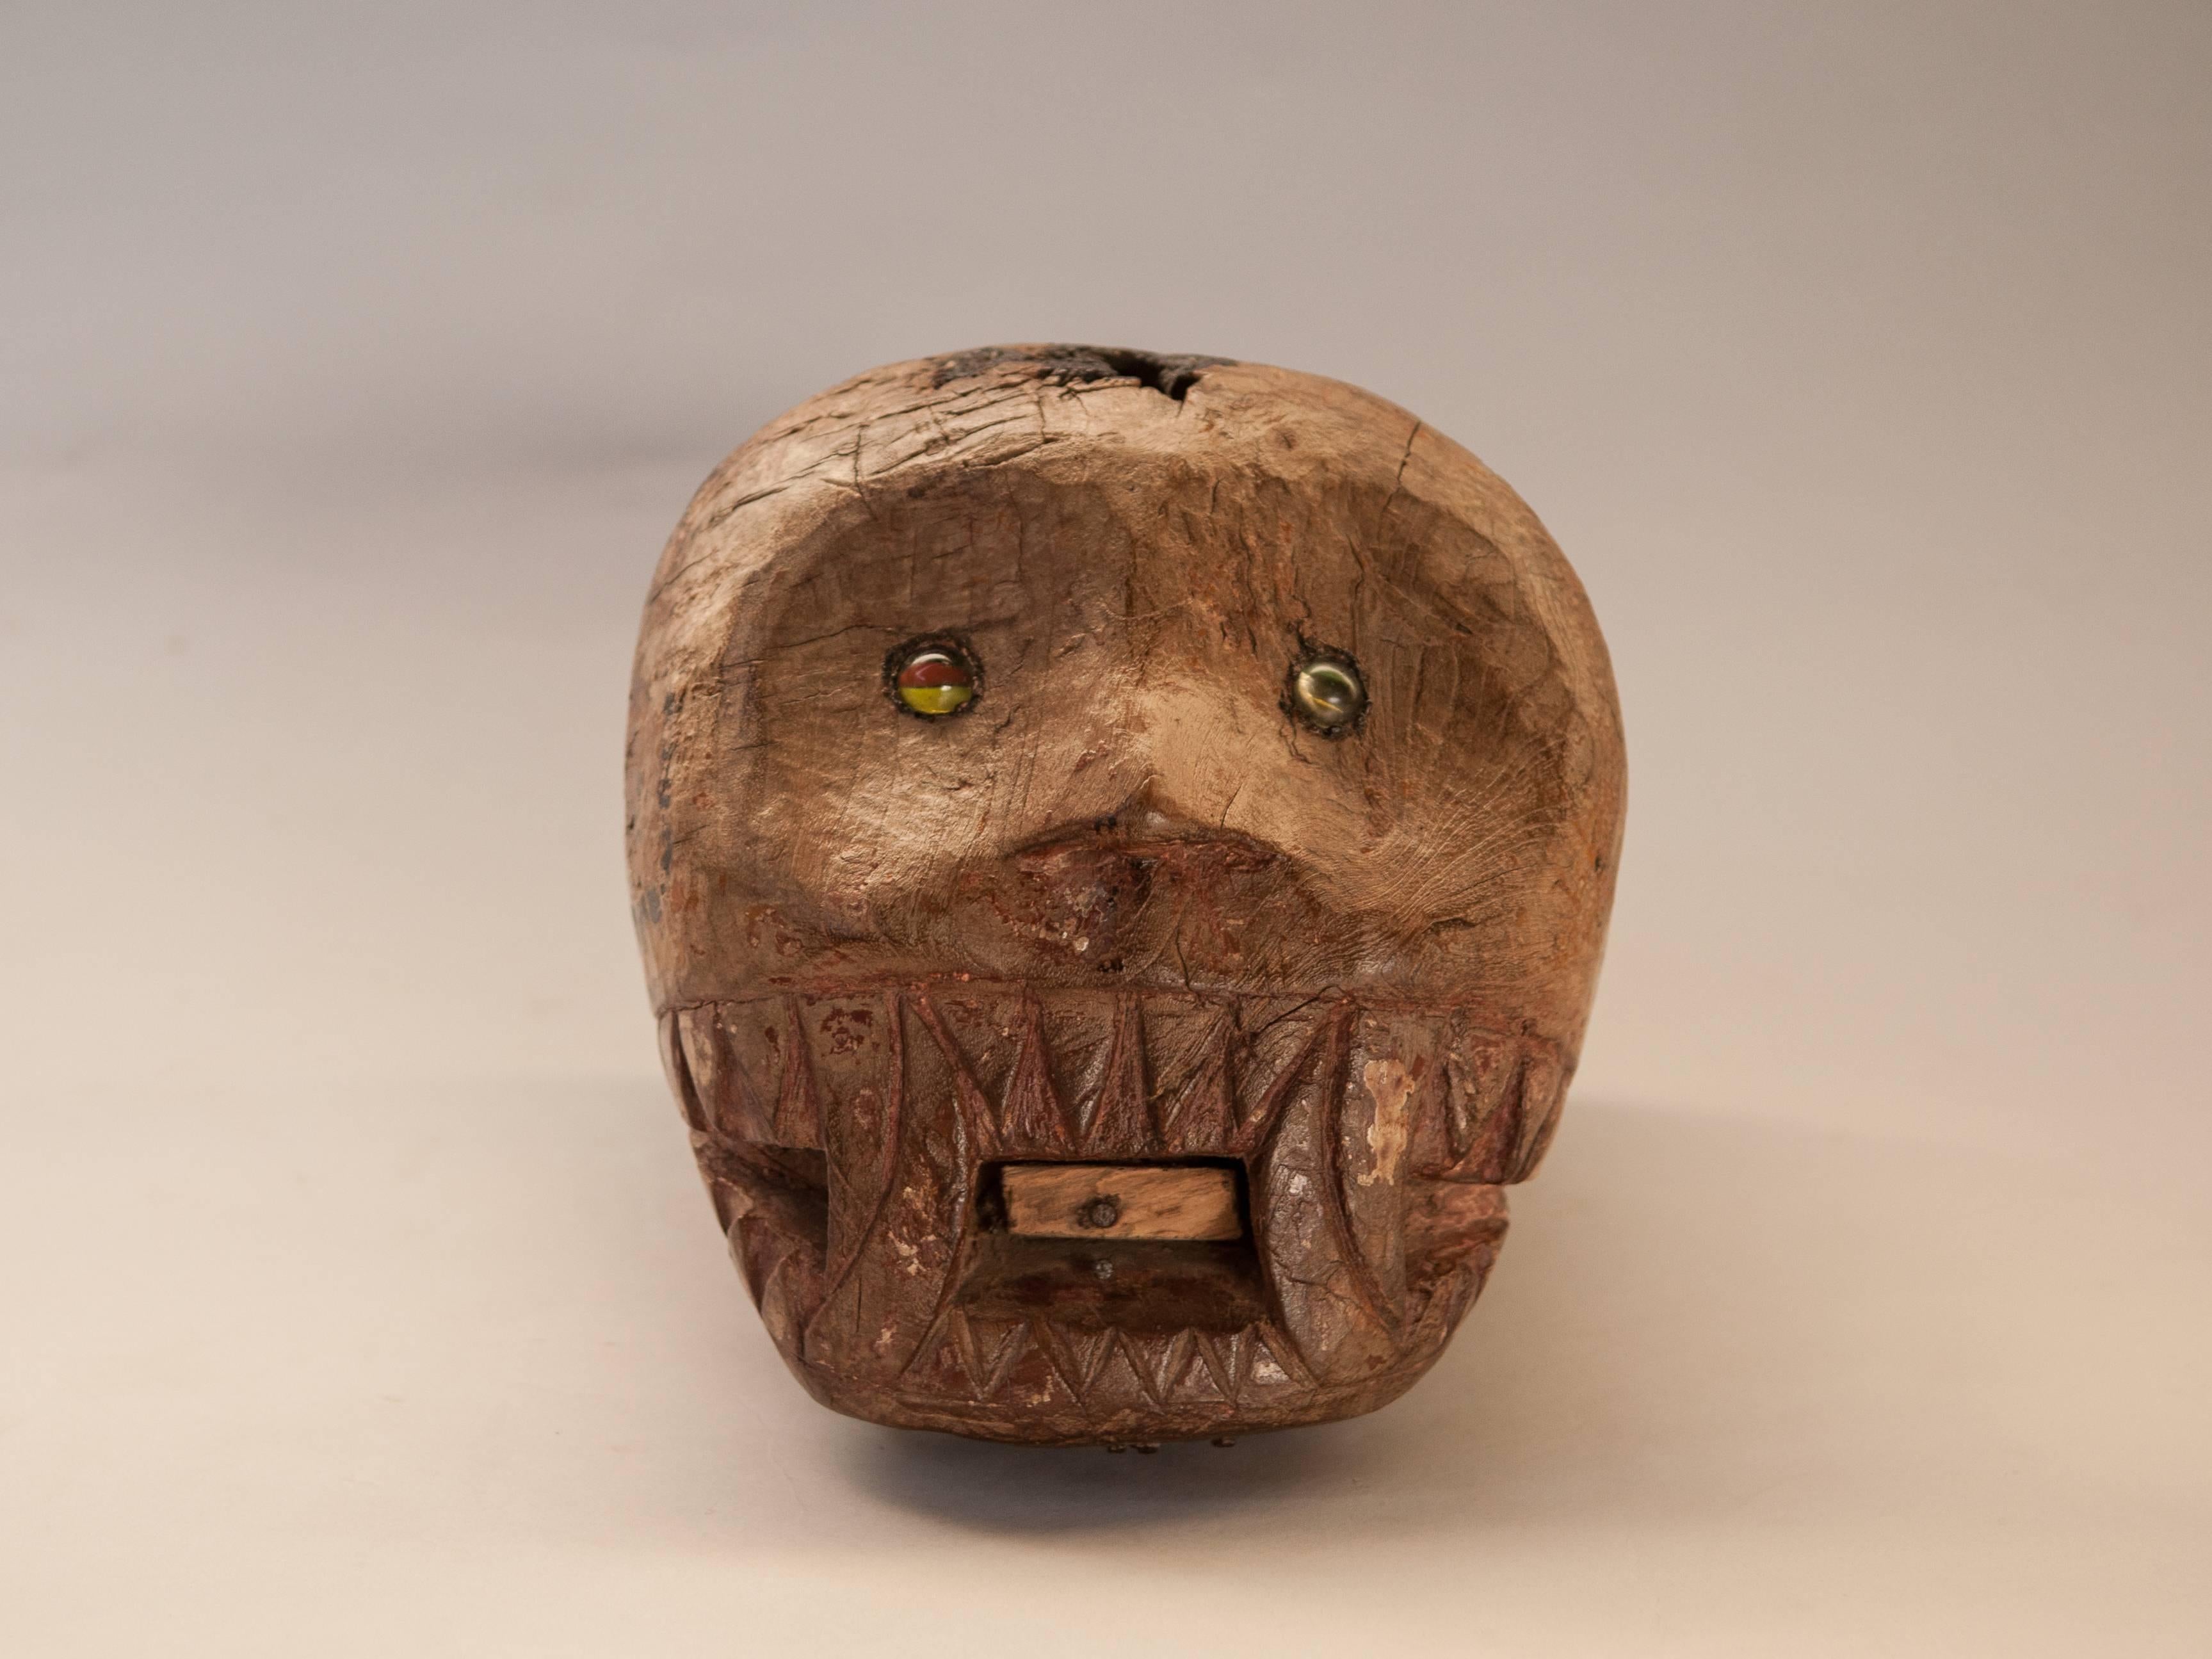 Tiger head carving with glass eyes from East Java, teak, mid-20th century.
Rustic carving of the head of a tiger. Remnants of paint are visible. The ears and the projection of the tongue are missing, but the penetrating glass eyed gaze remains.